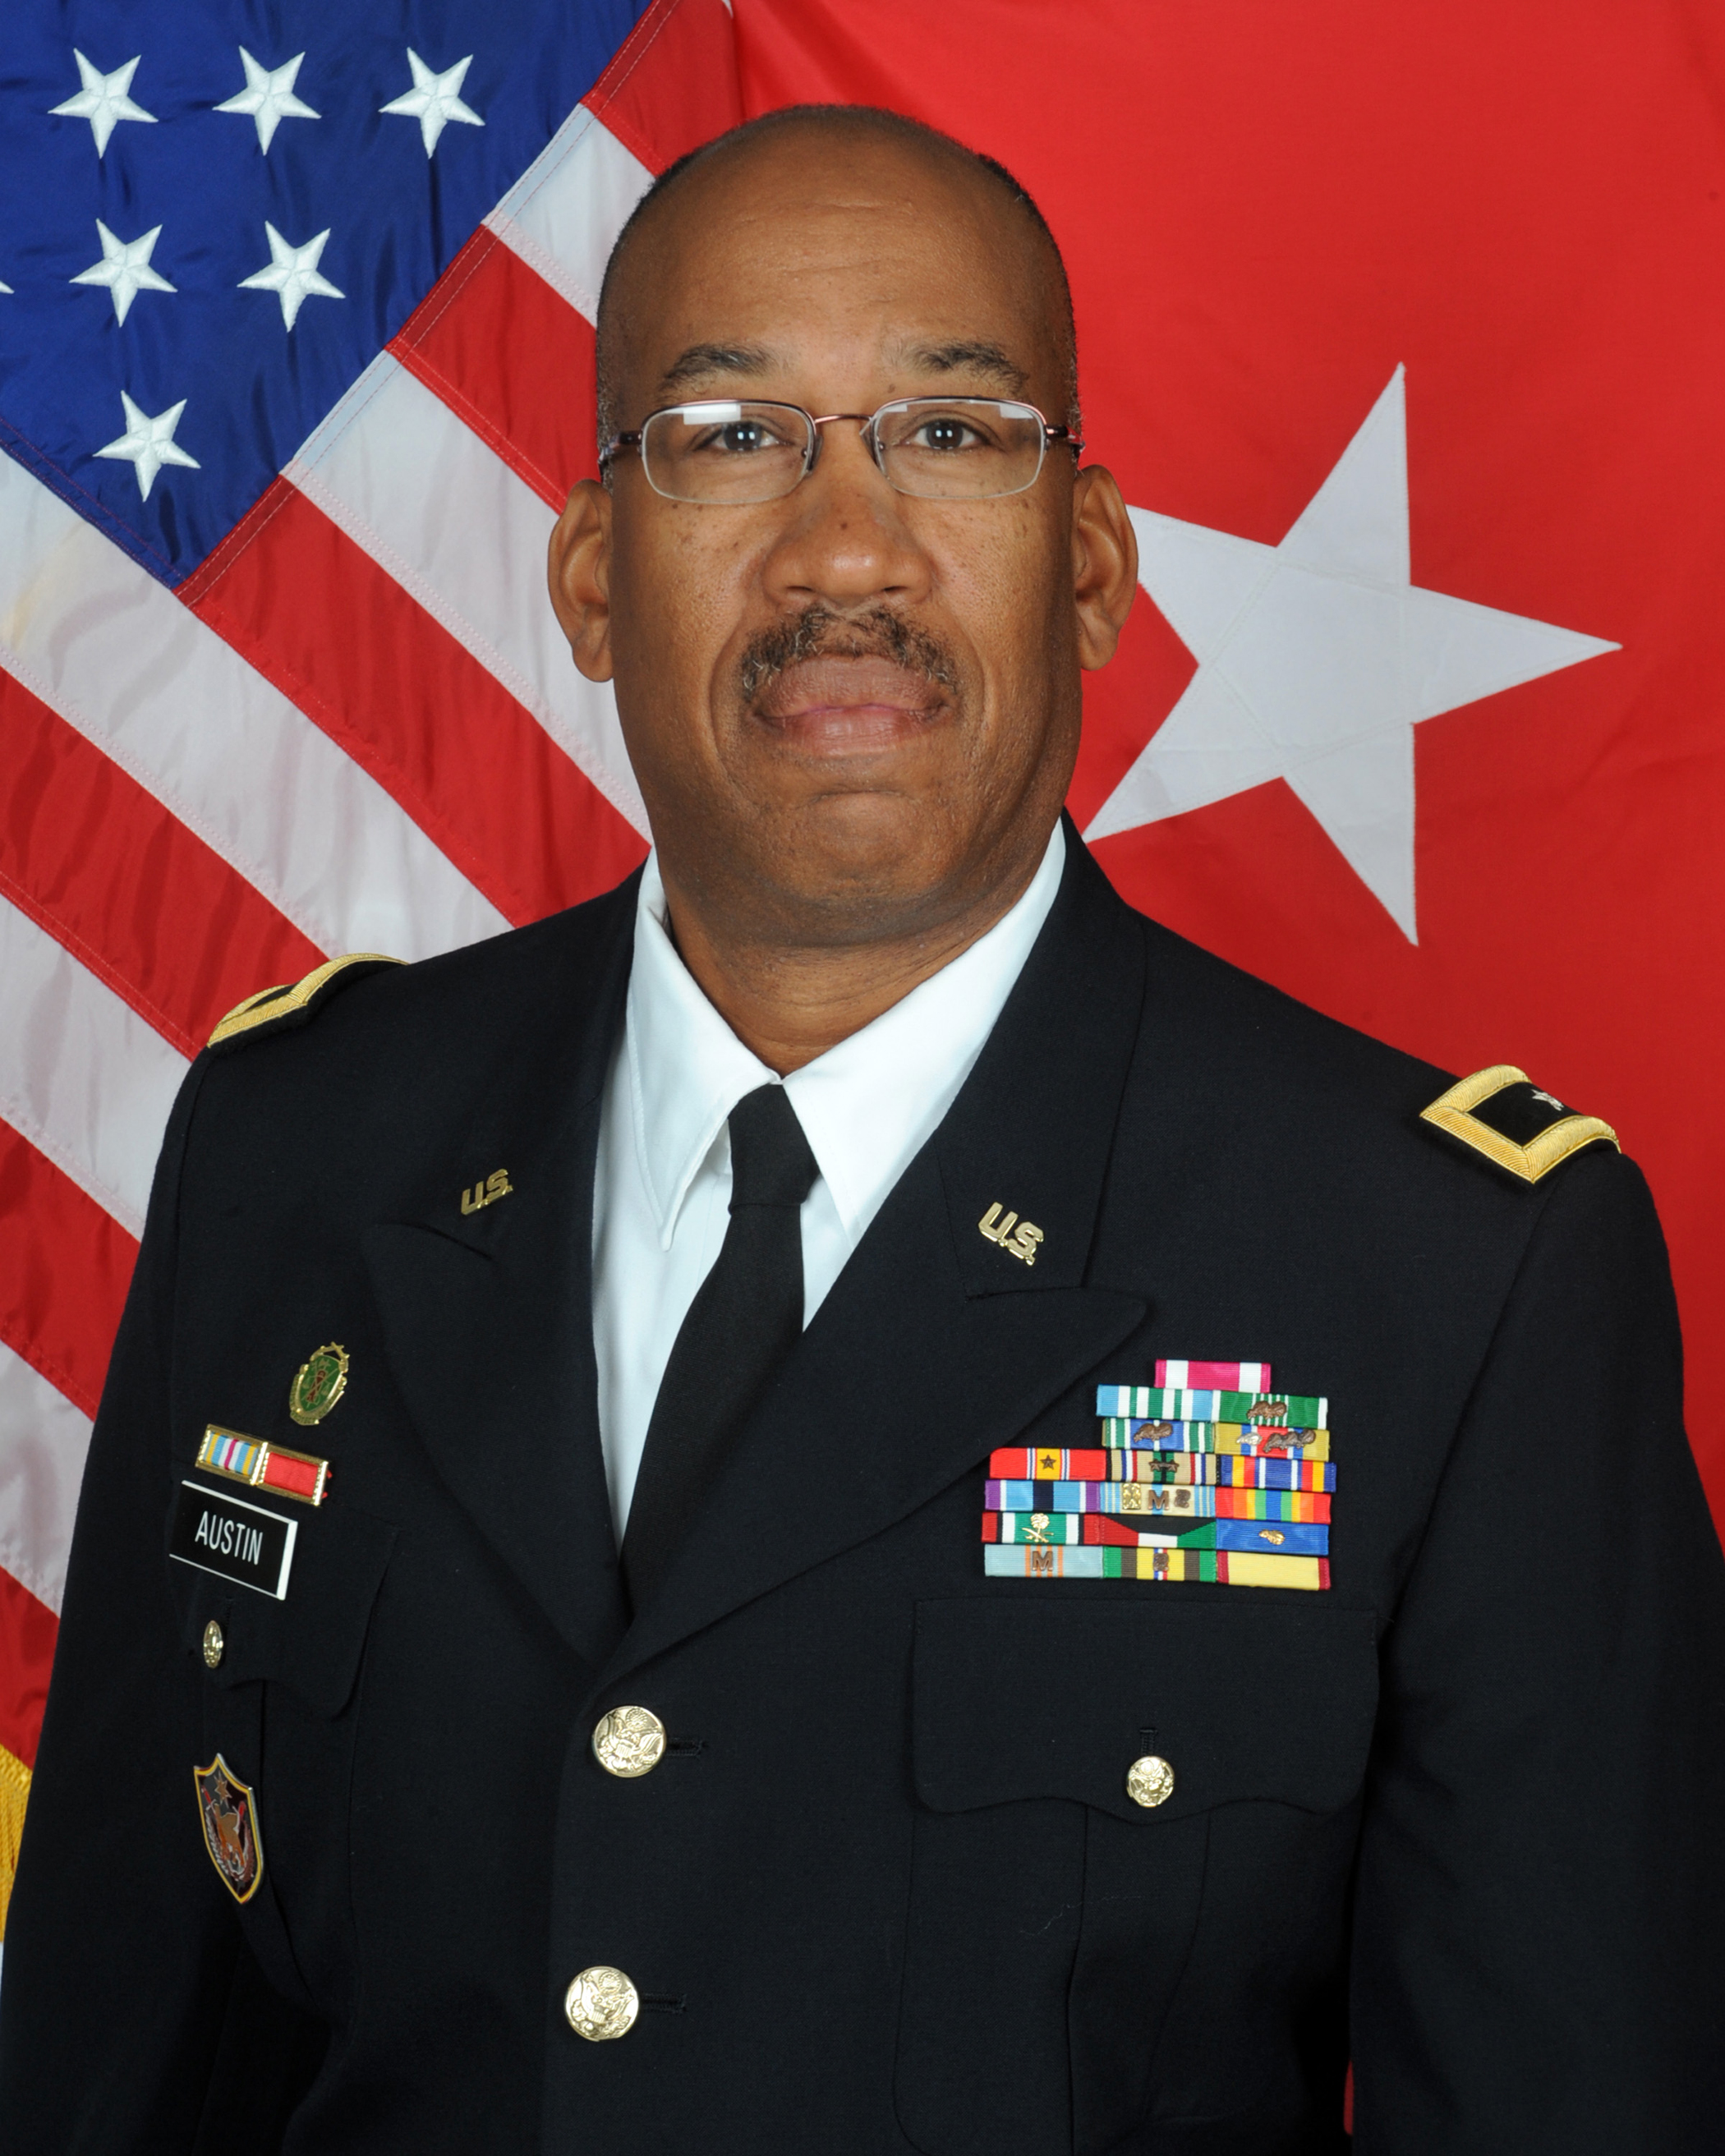 Army officer inducted into hall of fame | MSUToday | Michigan State ...